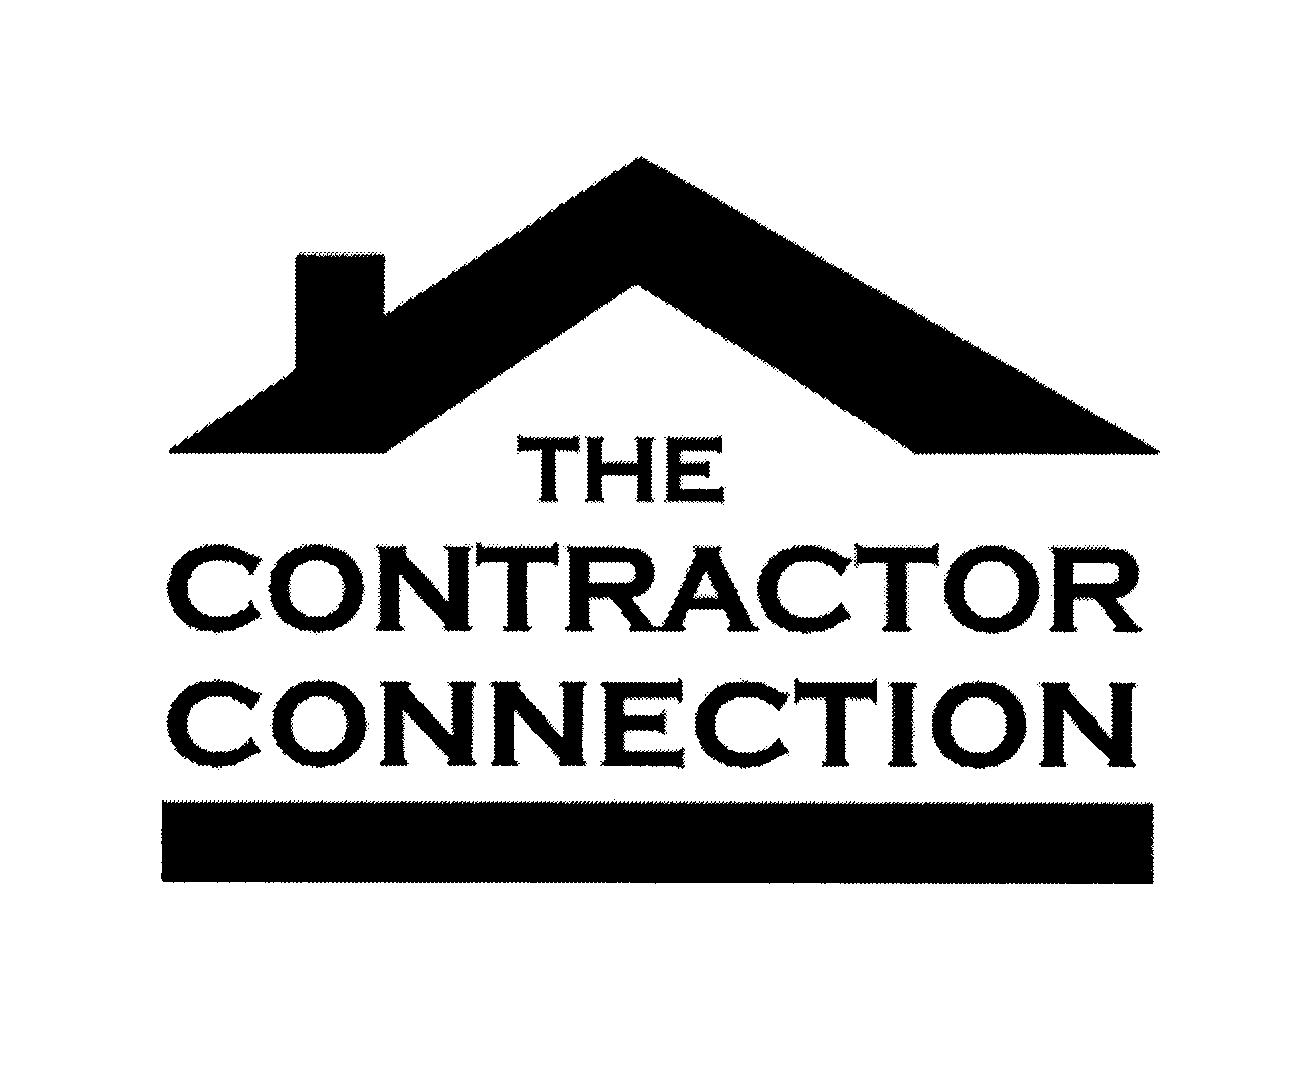  THE CONTRACTOR CONNECTION